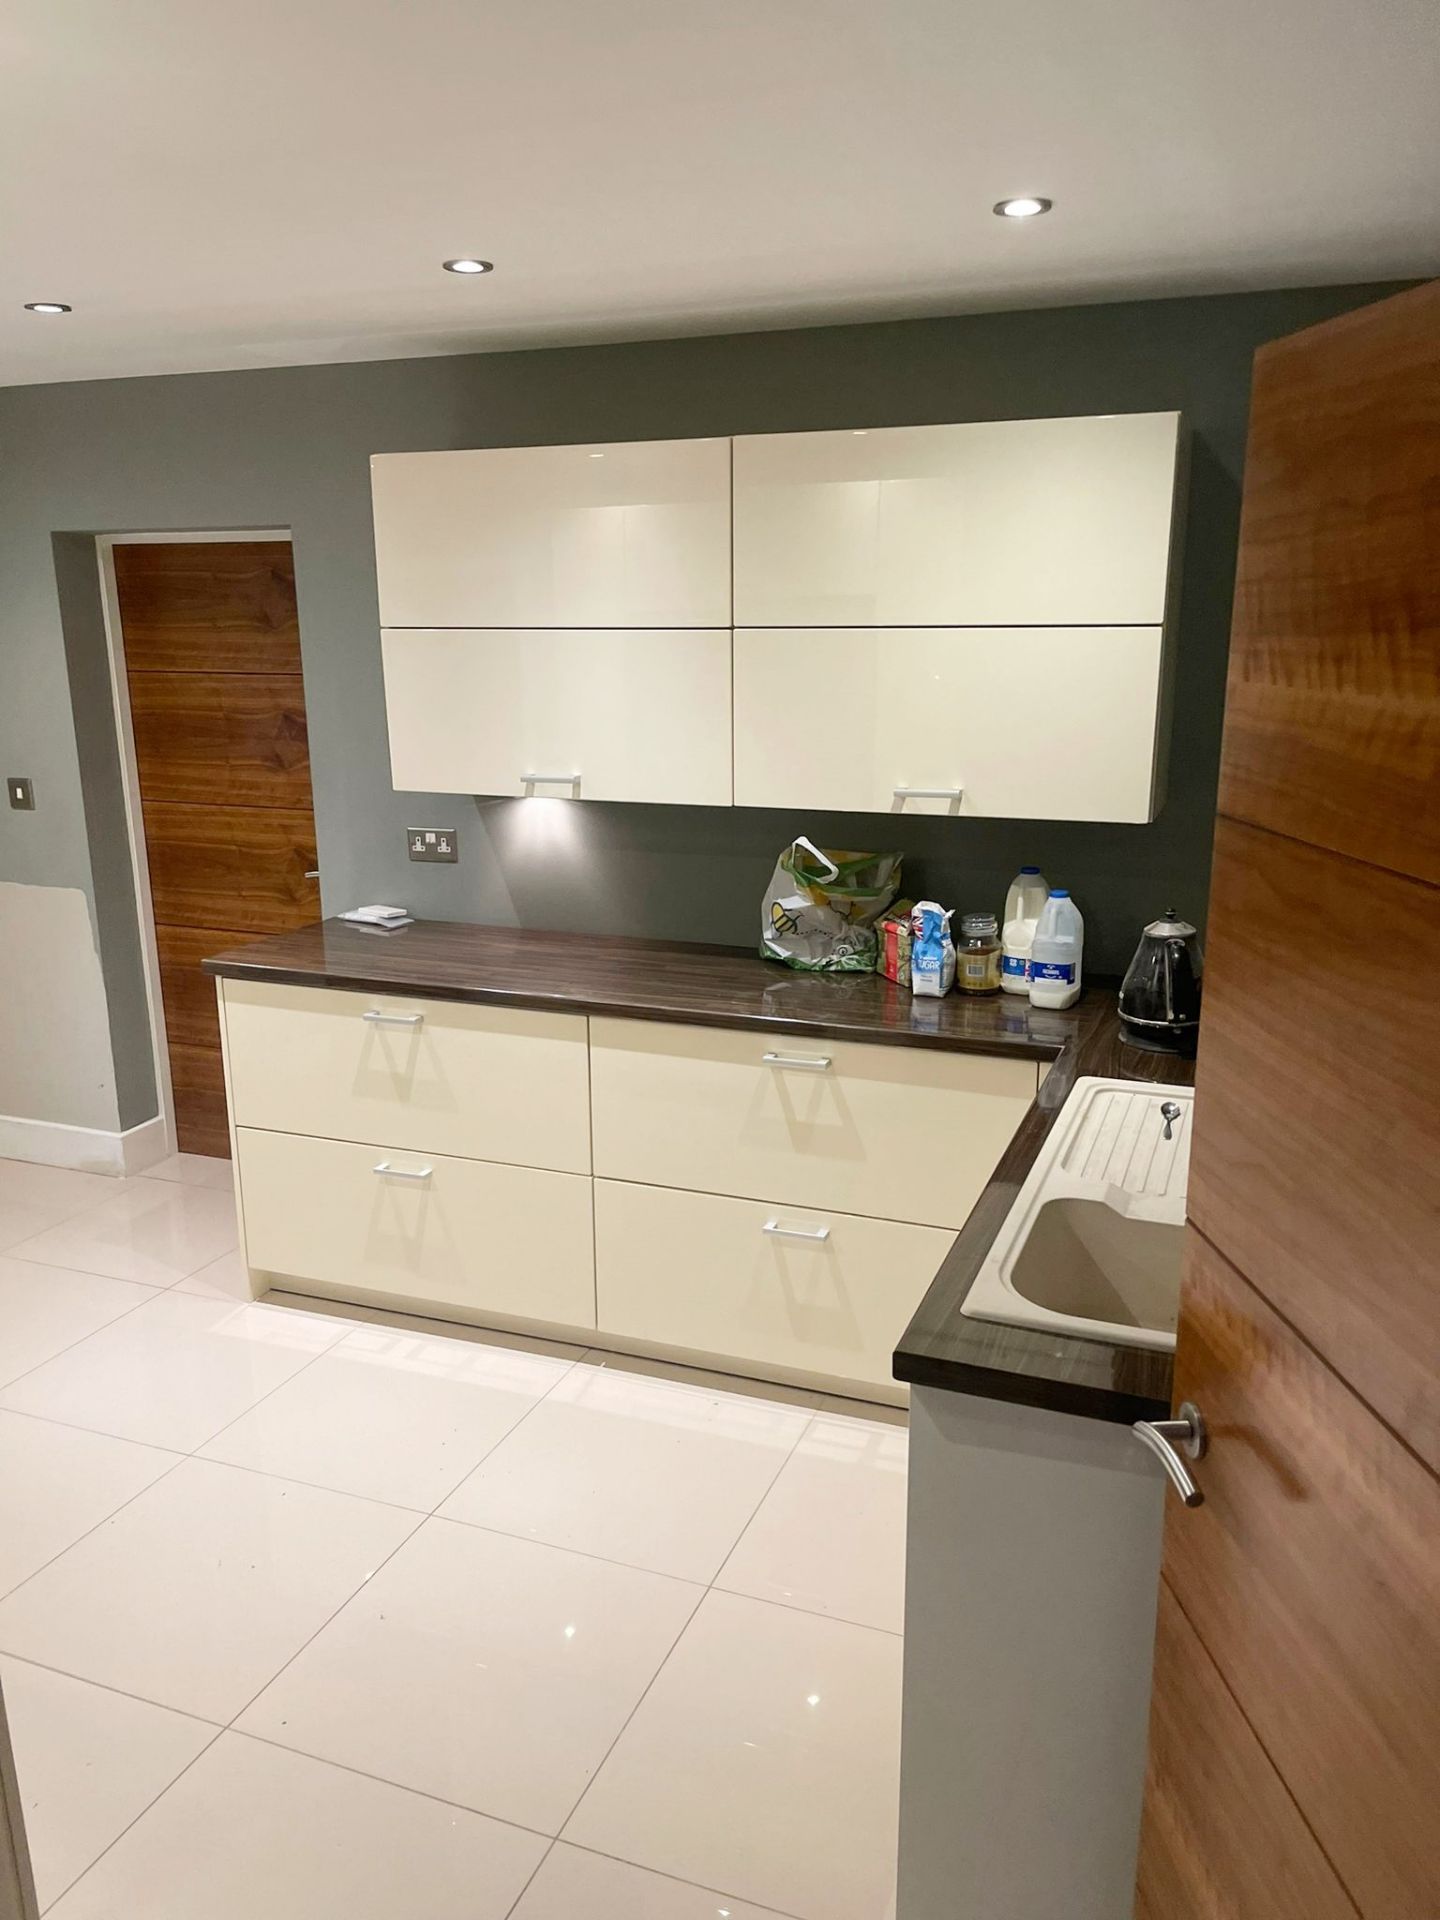 1 x Contemporary ALNO Fitted Kitchen With Branded  Appliances Created By Award Winning Kitchen - Image 47 of 89